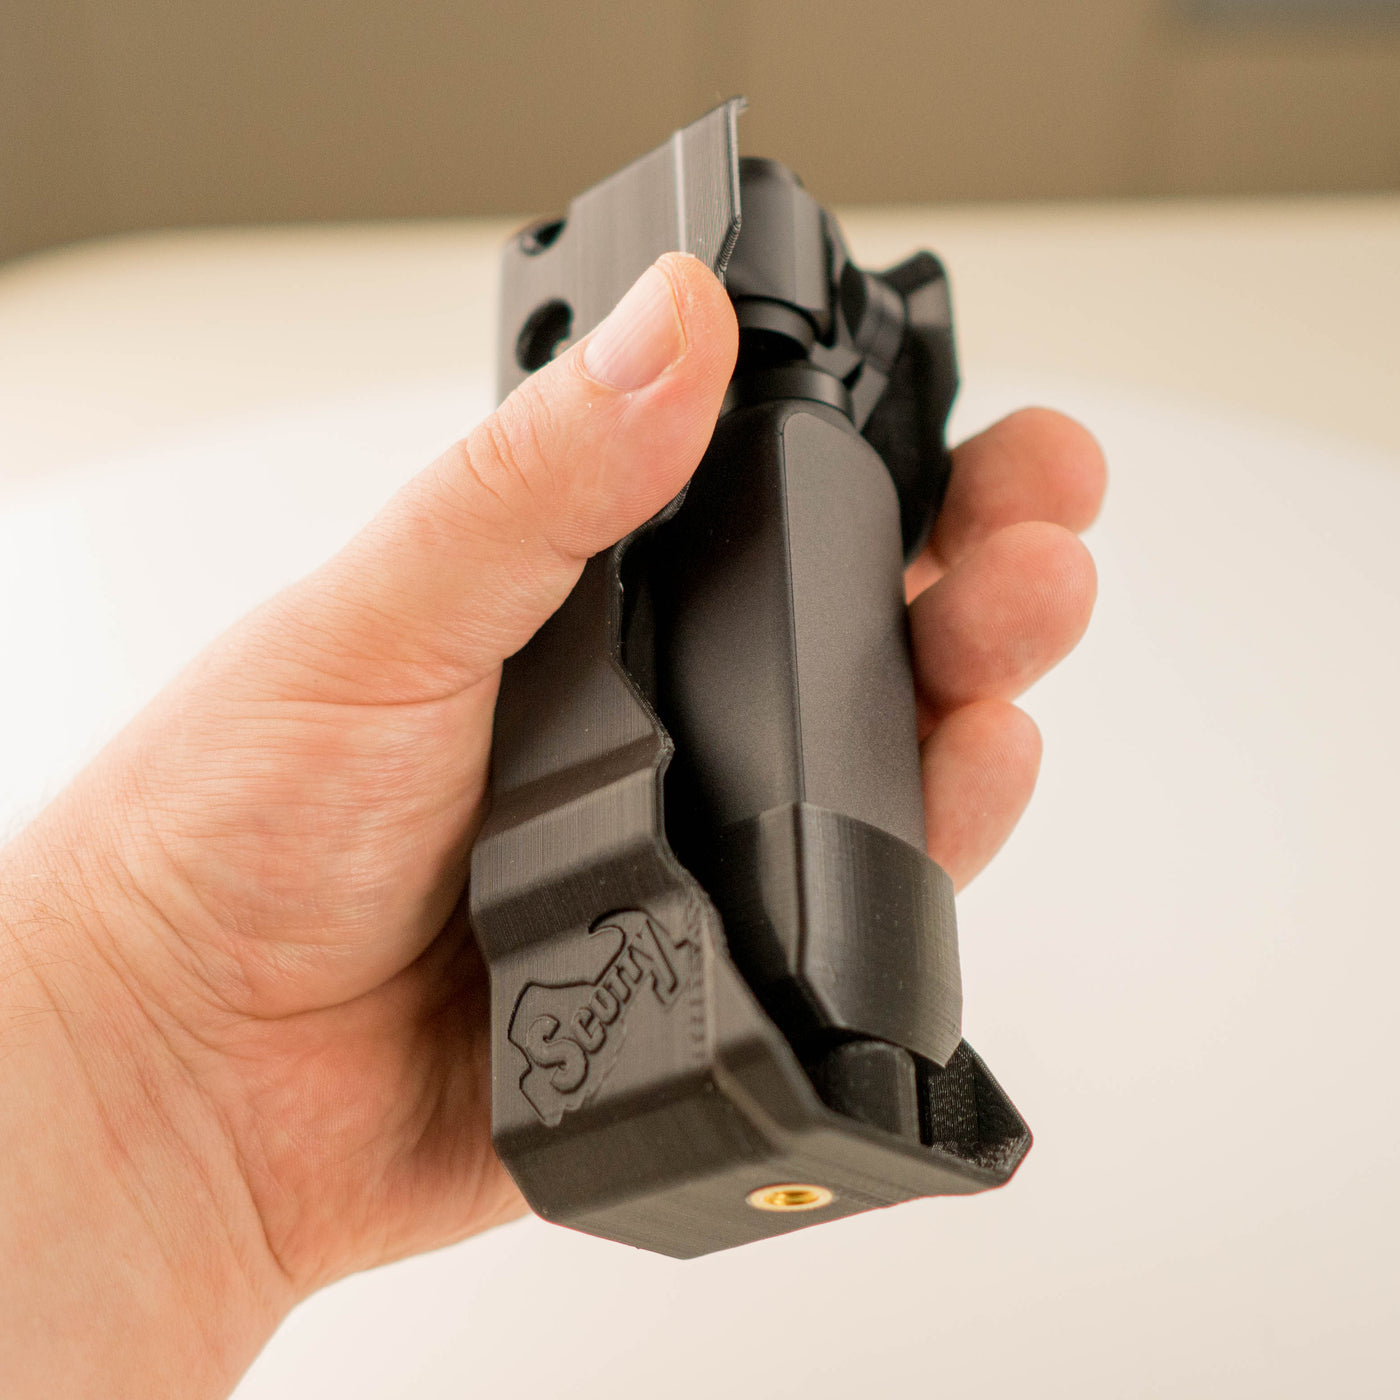 Osmo Pocket 1 Micro 4th Axis in Case - ScottyMakesStuff